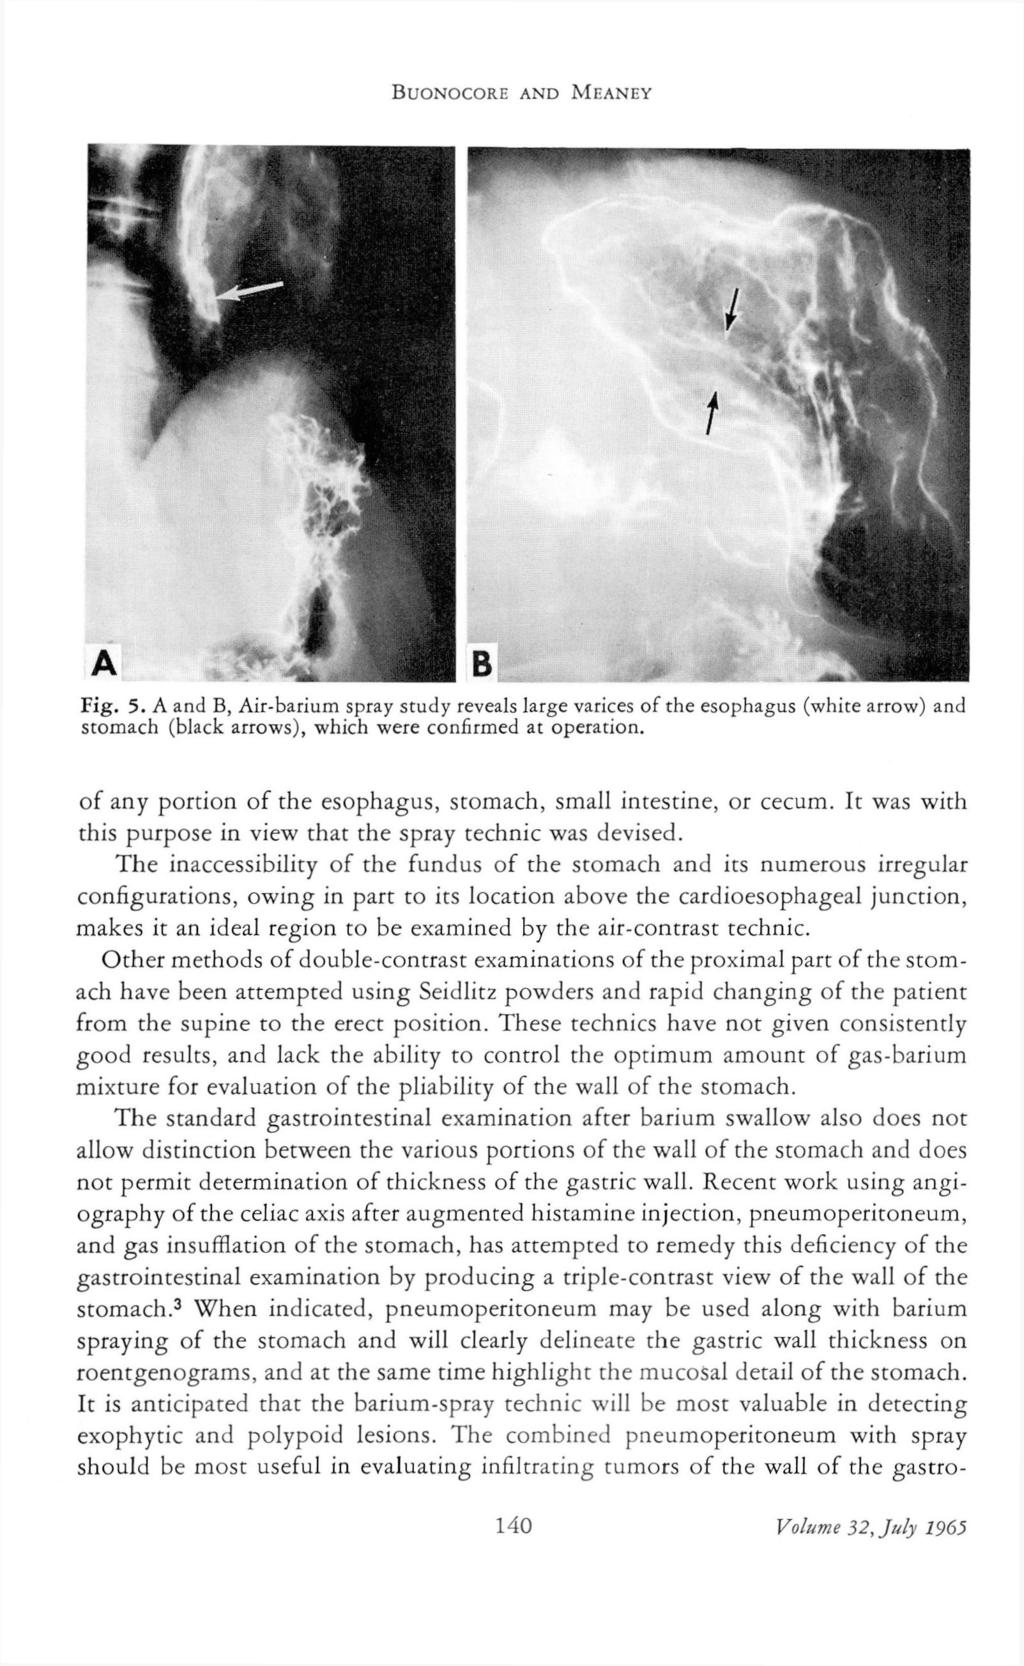 BUONOCORE AND MEANEY Fig. 5. A and B, Air-barium spray study reveals large varices of the esophagus (white arrow) and stomach (black arrows), which were confirmed at operation.